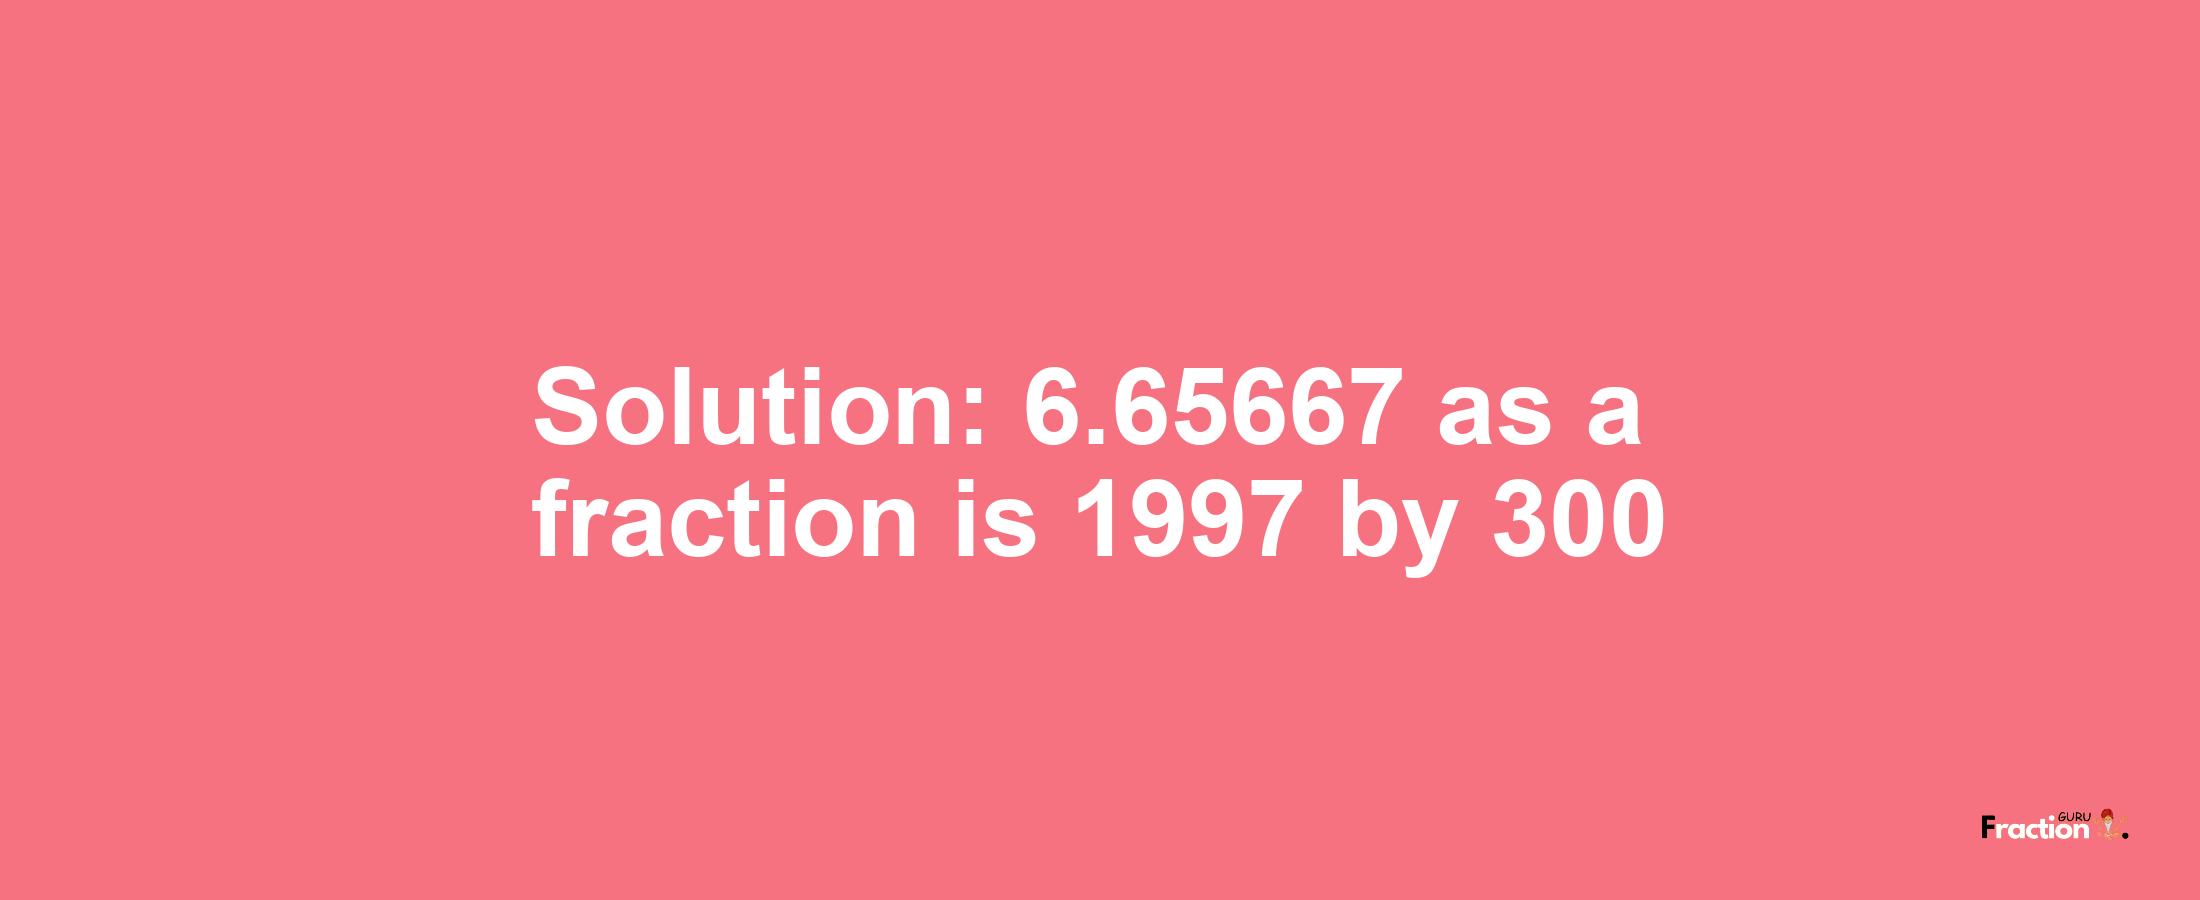 Solution:6.65667 as a fraction is 1997/300